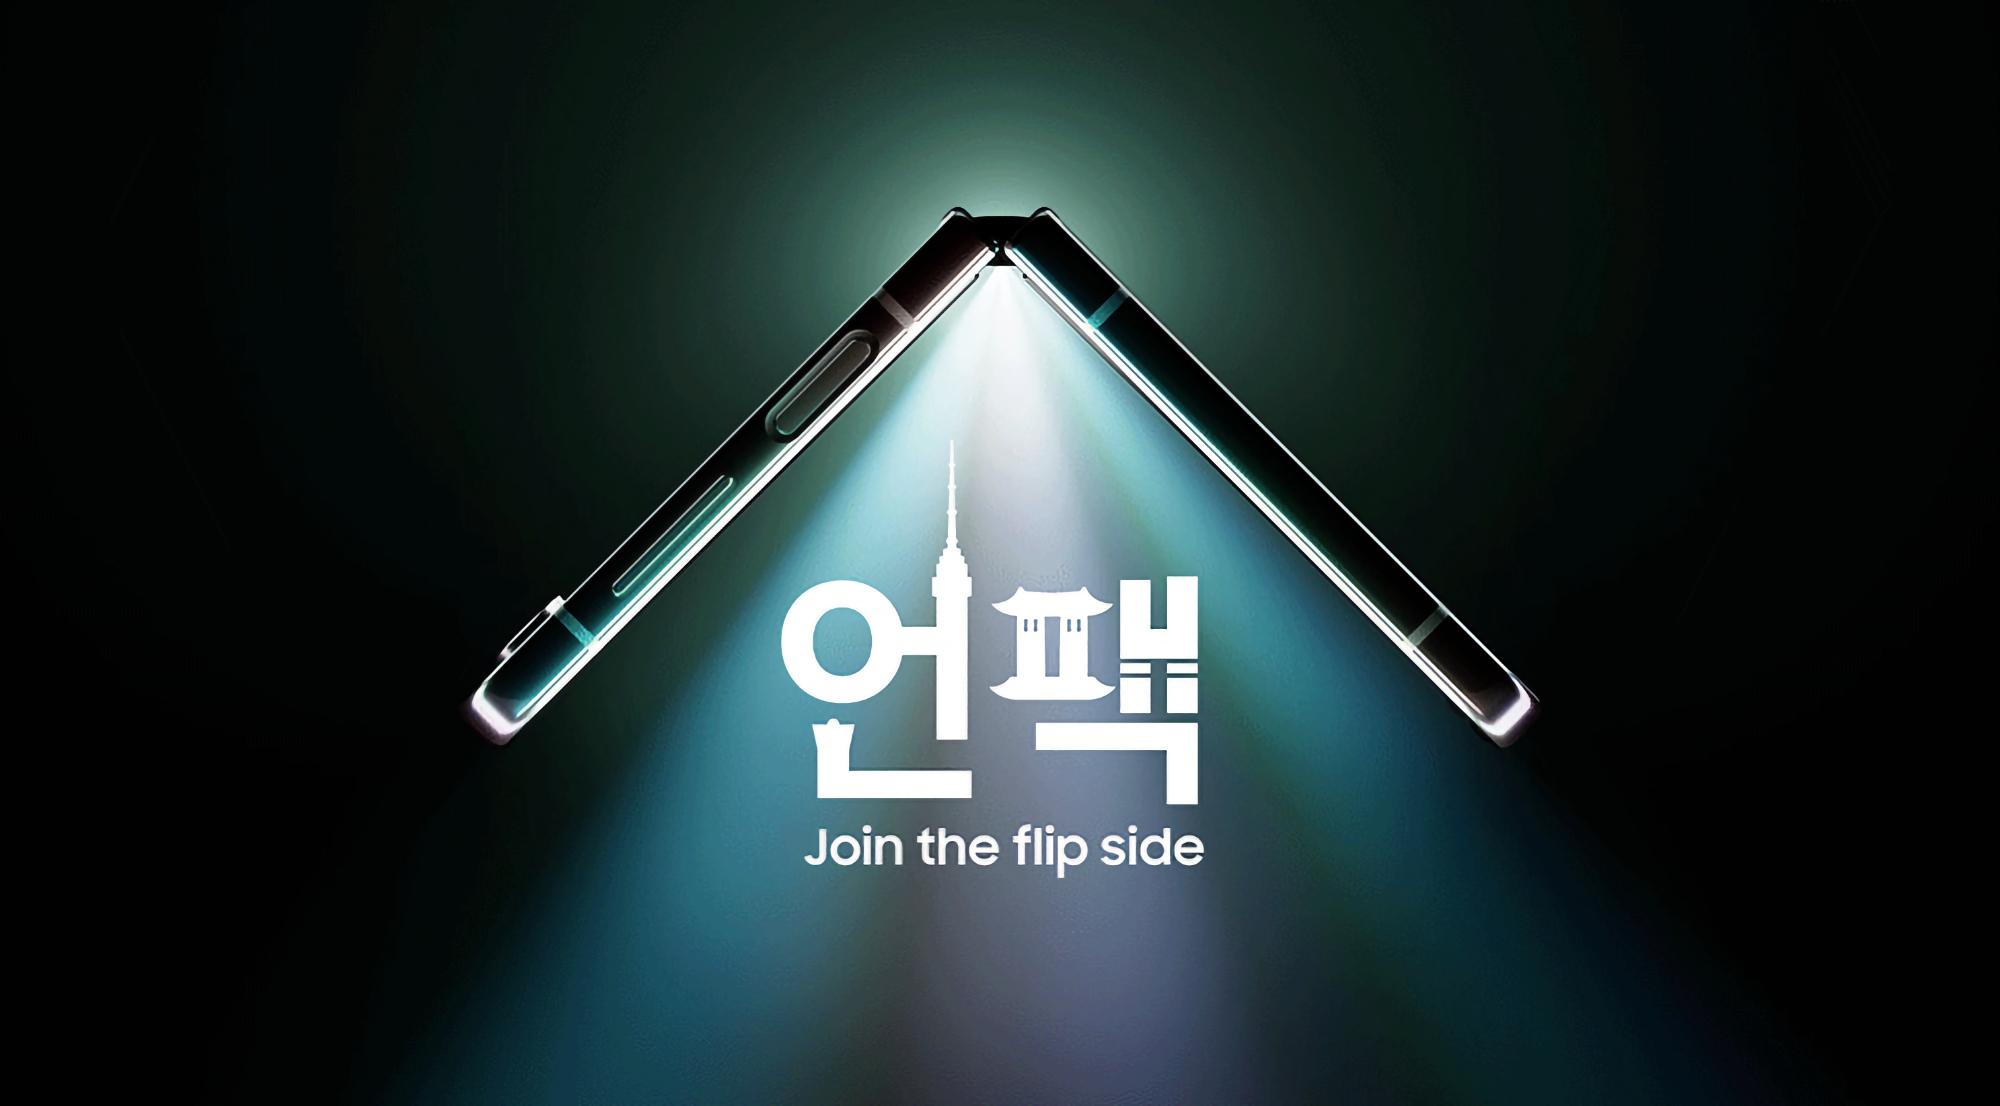 Samsung has announced the date of the Galaxy Unpacked presentation, where it will showcase the foldable Galaxy Fold 5 smartphone, Galaxy Flip 5 and other new products